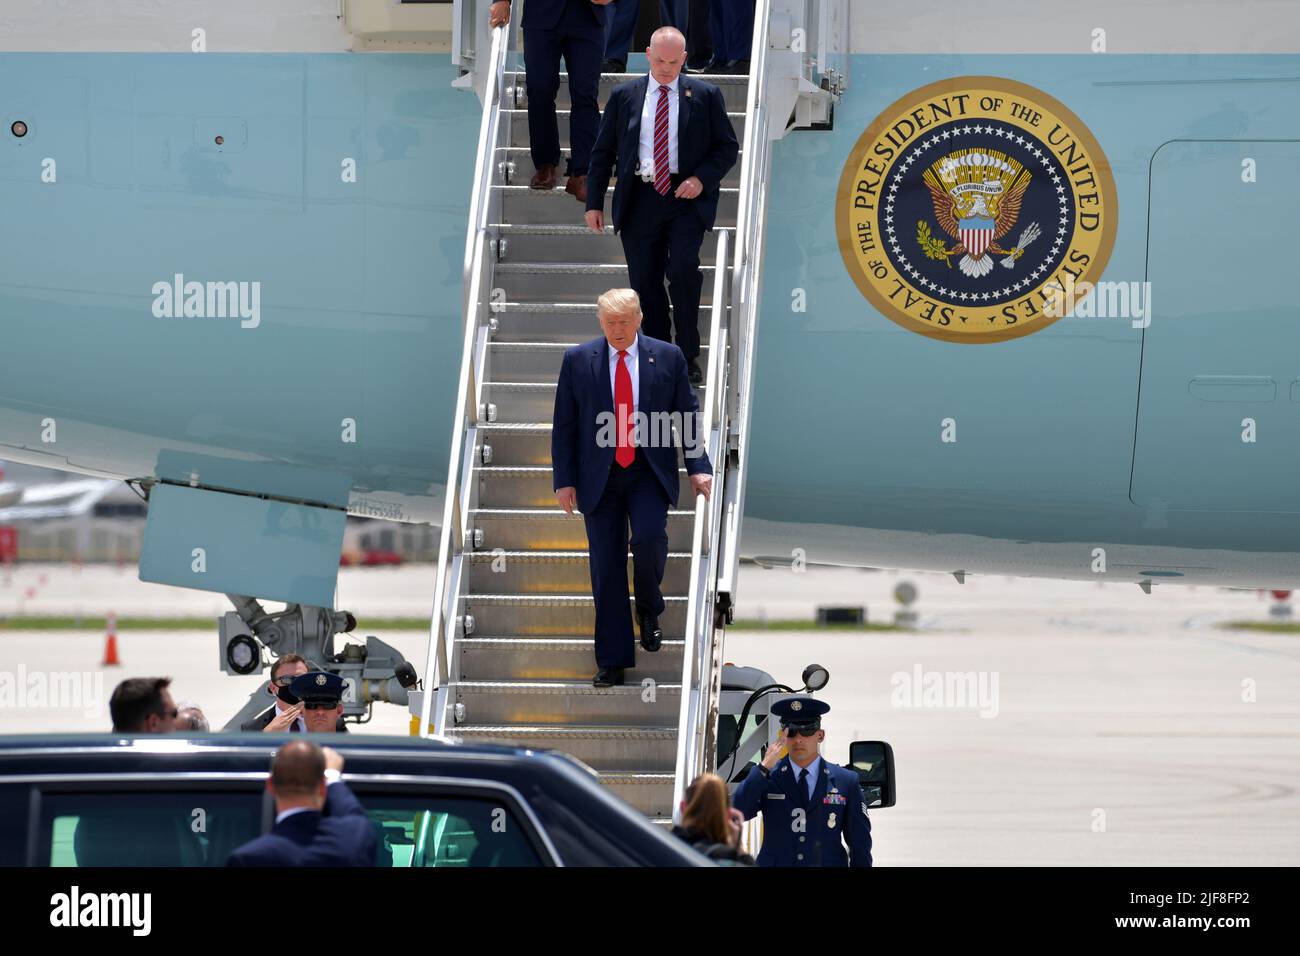 Miami, United States Of America. 10th July, 2020. MIAMI, FL - JULY 10: US President Donald Trump arriving at Miami International Airport on July 10, 2020 in Miami, Florida. The President was greeted by Carlos A. Gimnez Mayor of Miami-Dade County and is in town to receive a briefing on SOUTHCOM Enhanced Counternarcotics Operation and to attend Iglesia Doral Jesus Worship Center to participate in a roundtable on Supporting the People of Venezuela People: President Donald Trump Credit: Storms Media Group/Alamy Live News Stock Photo